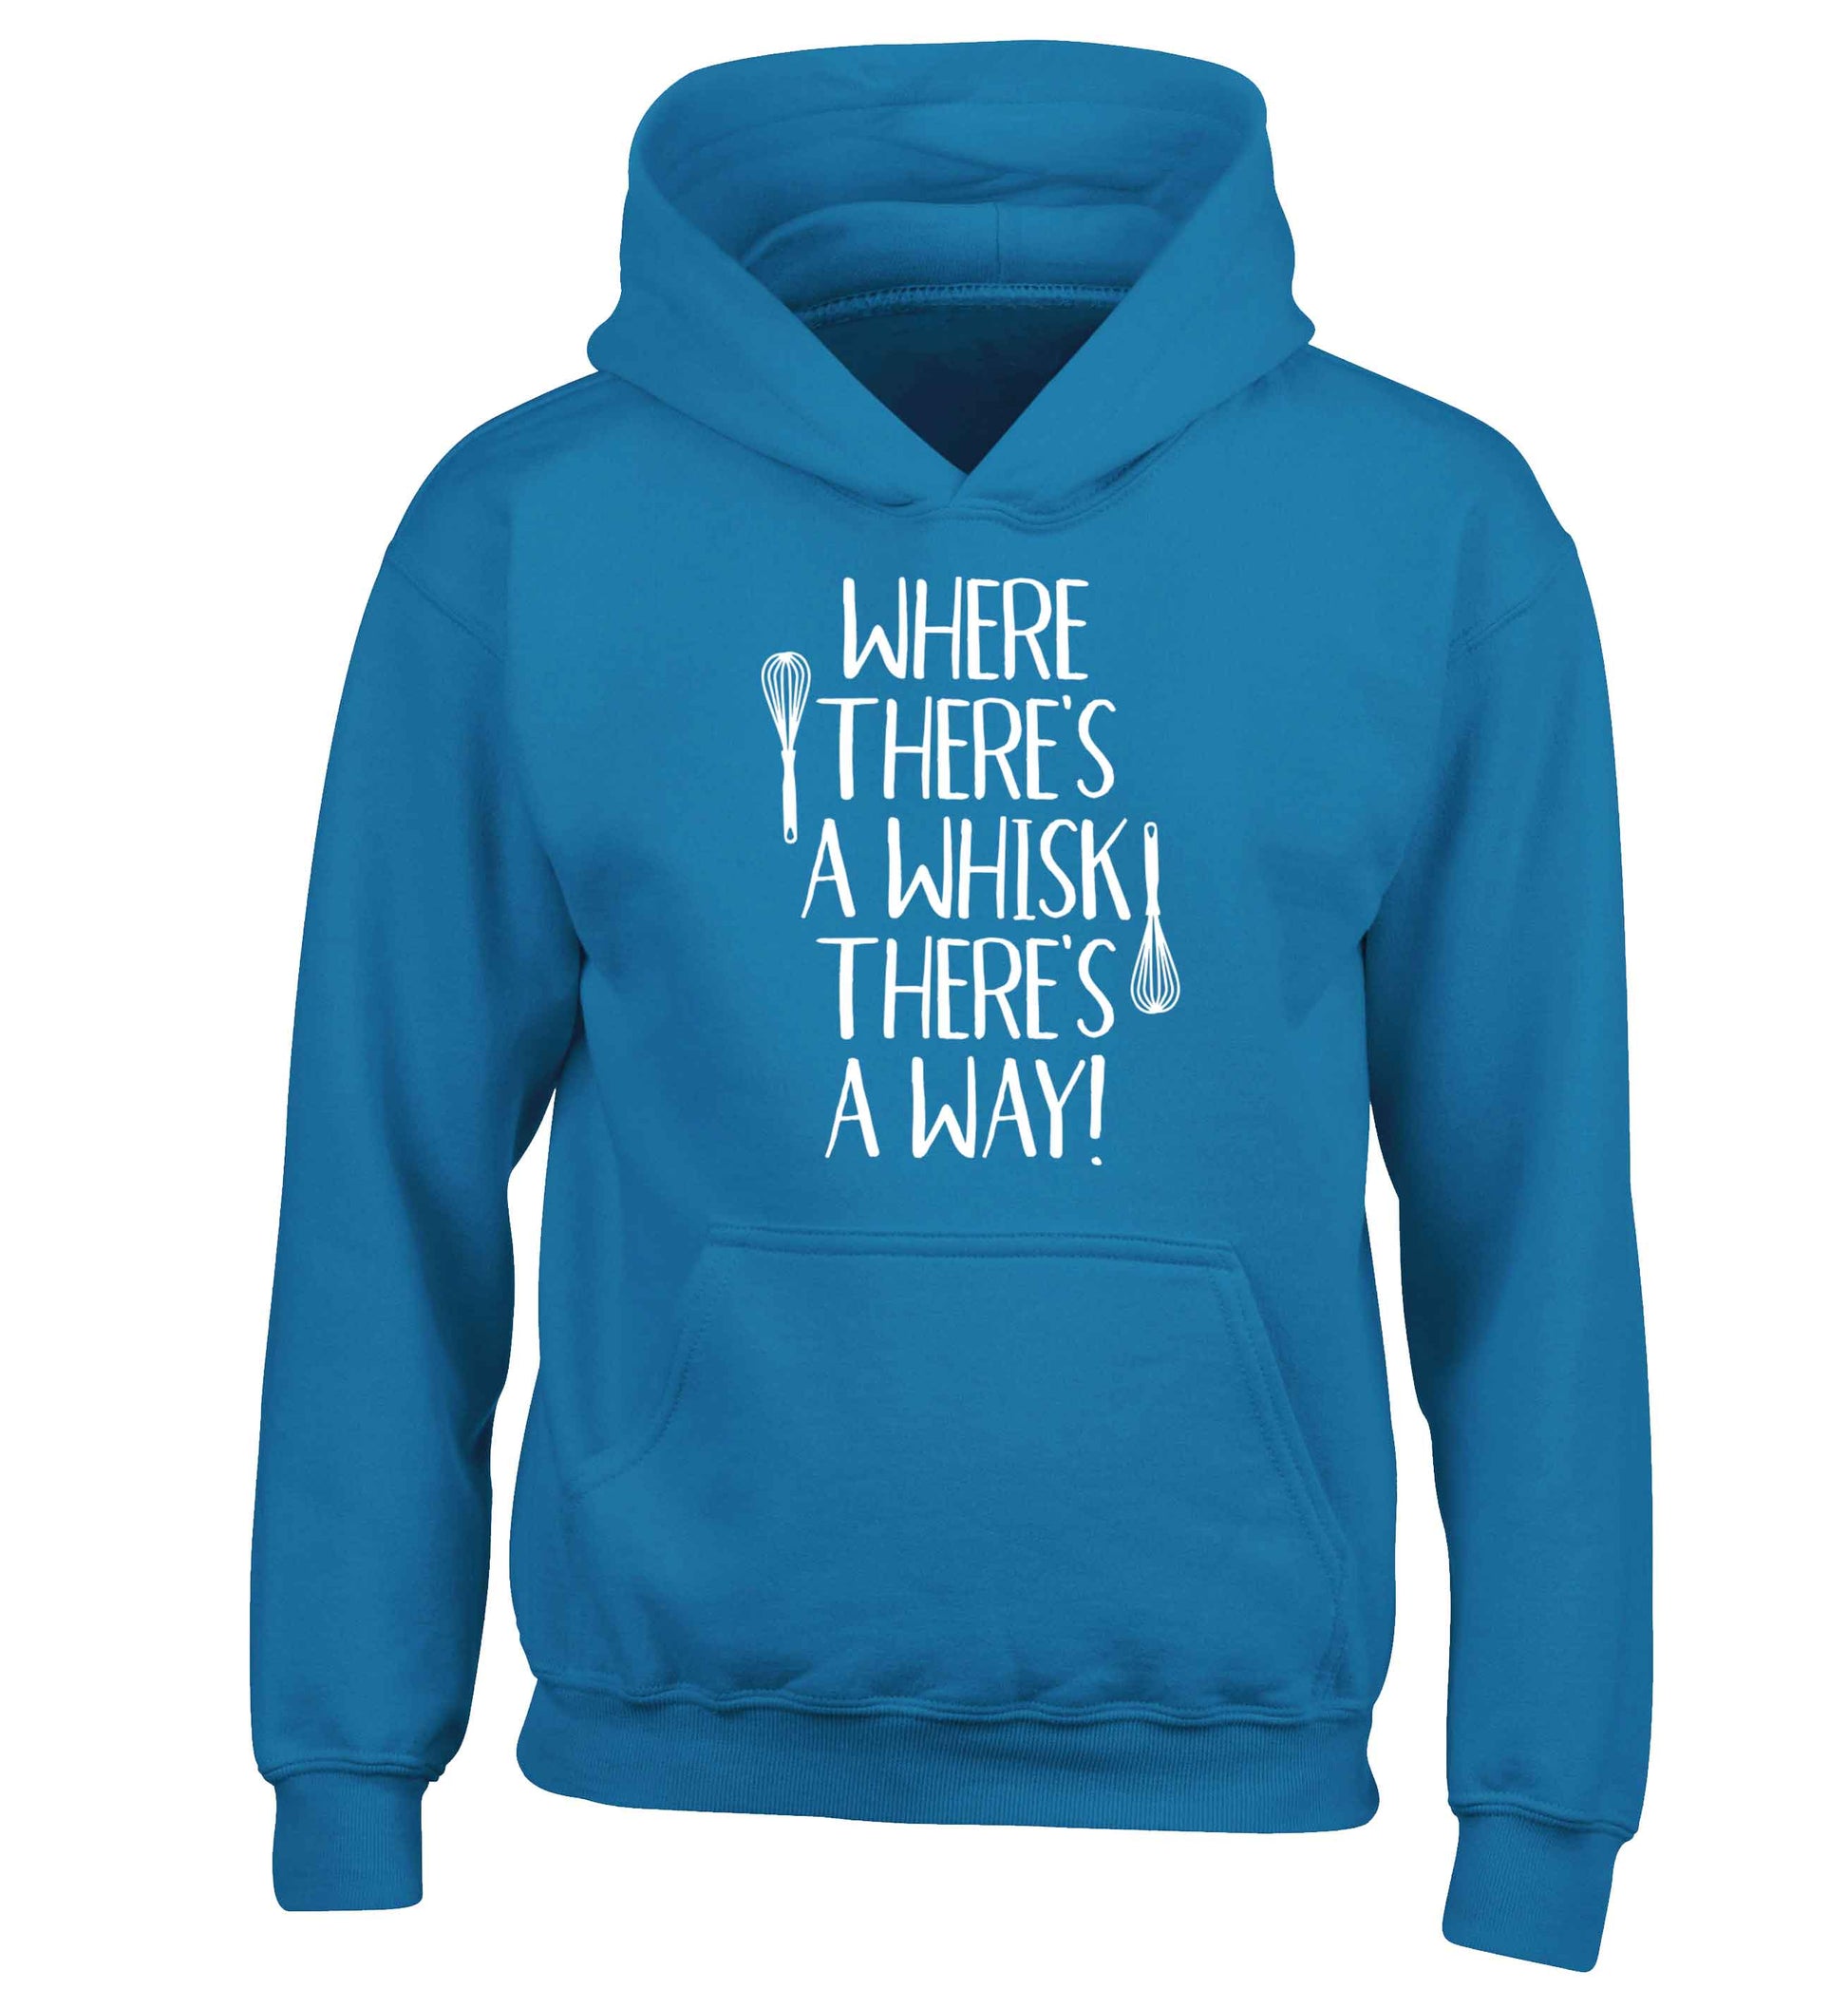 Where there's a whisk there's a way children's blue hoodie 12-13 Years